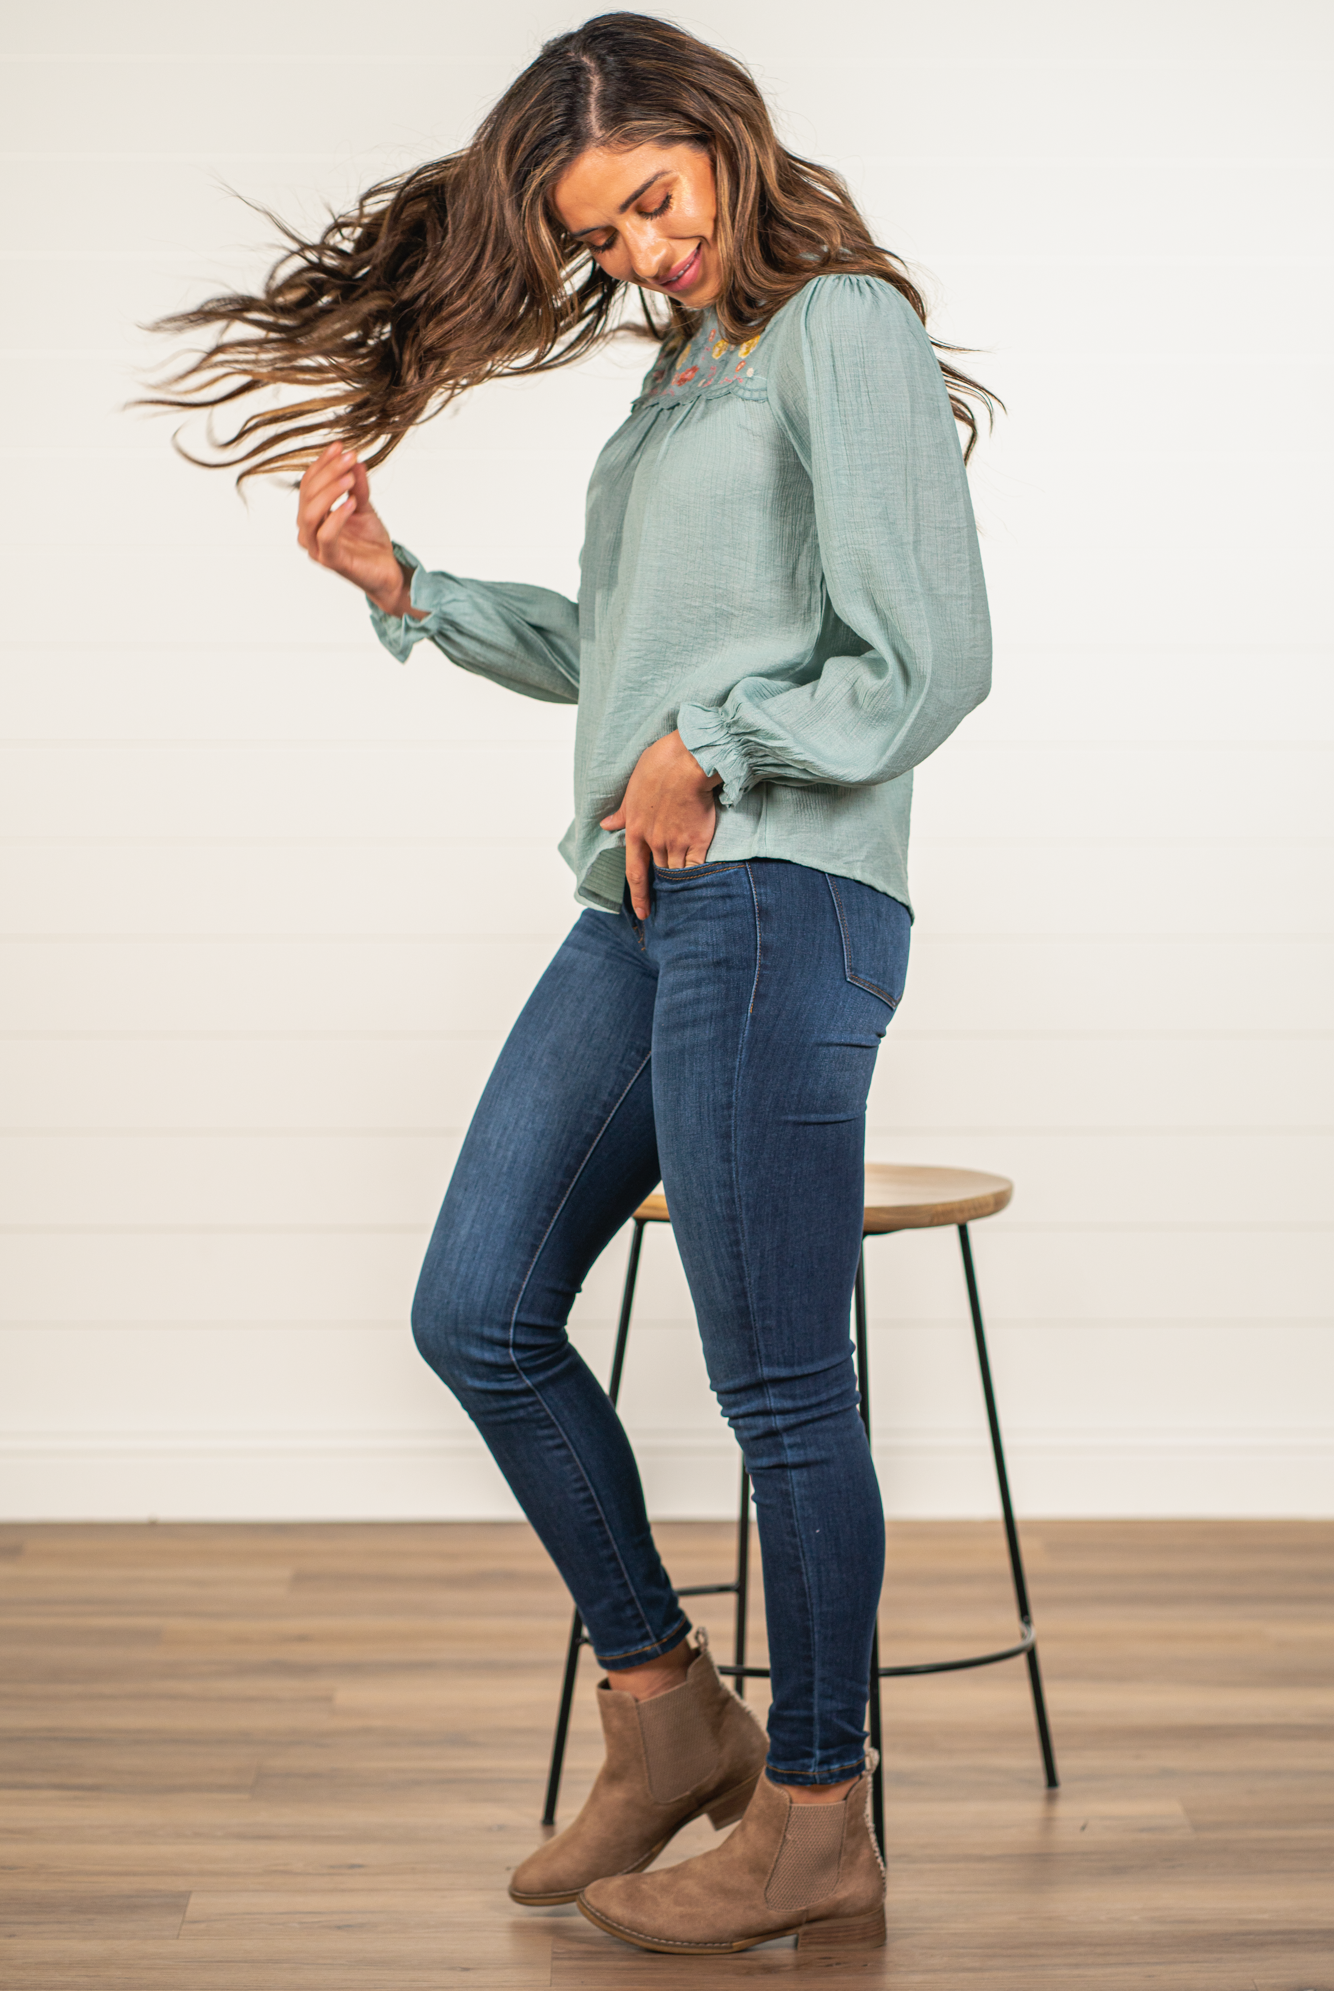 Blu Pepper Color: Minty Blue Long Sleeves Floral Embroidered Keyhole Back Sinched Wrists 86% RAYON 14% NYLON Style #: CR1476-Minty Blue Contact us for any additional measurements or sizing.